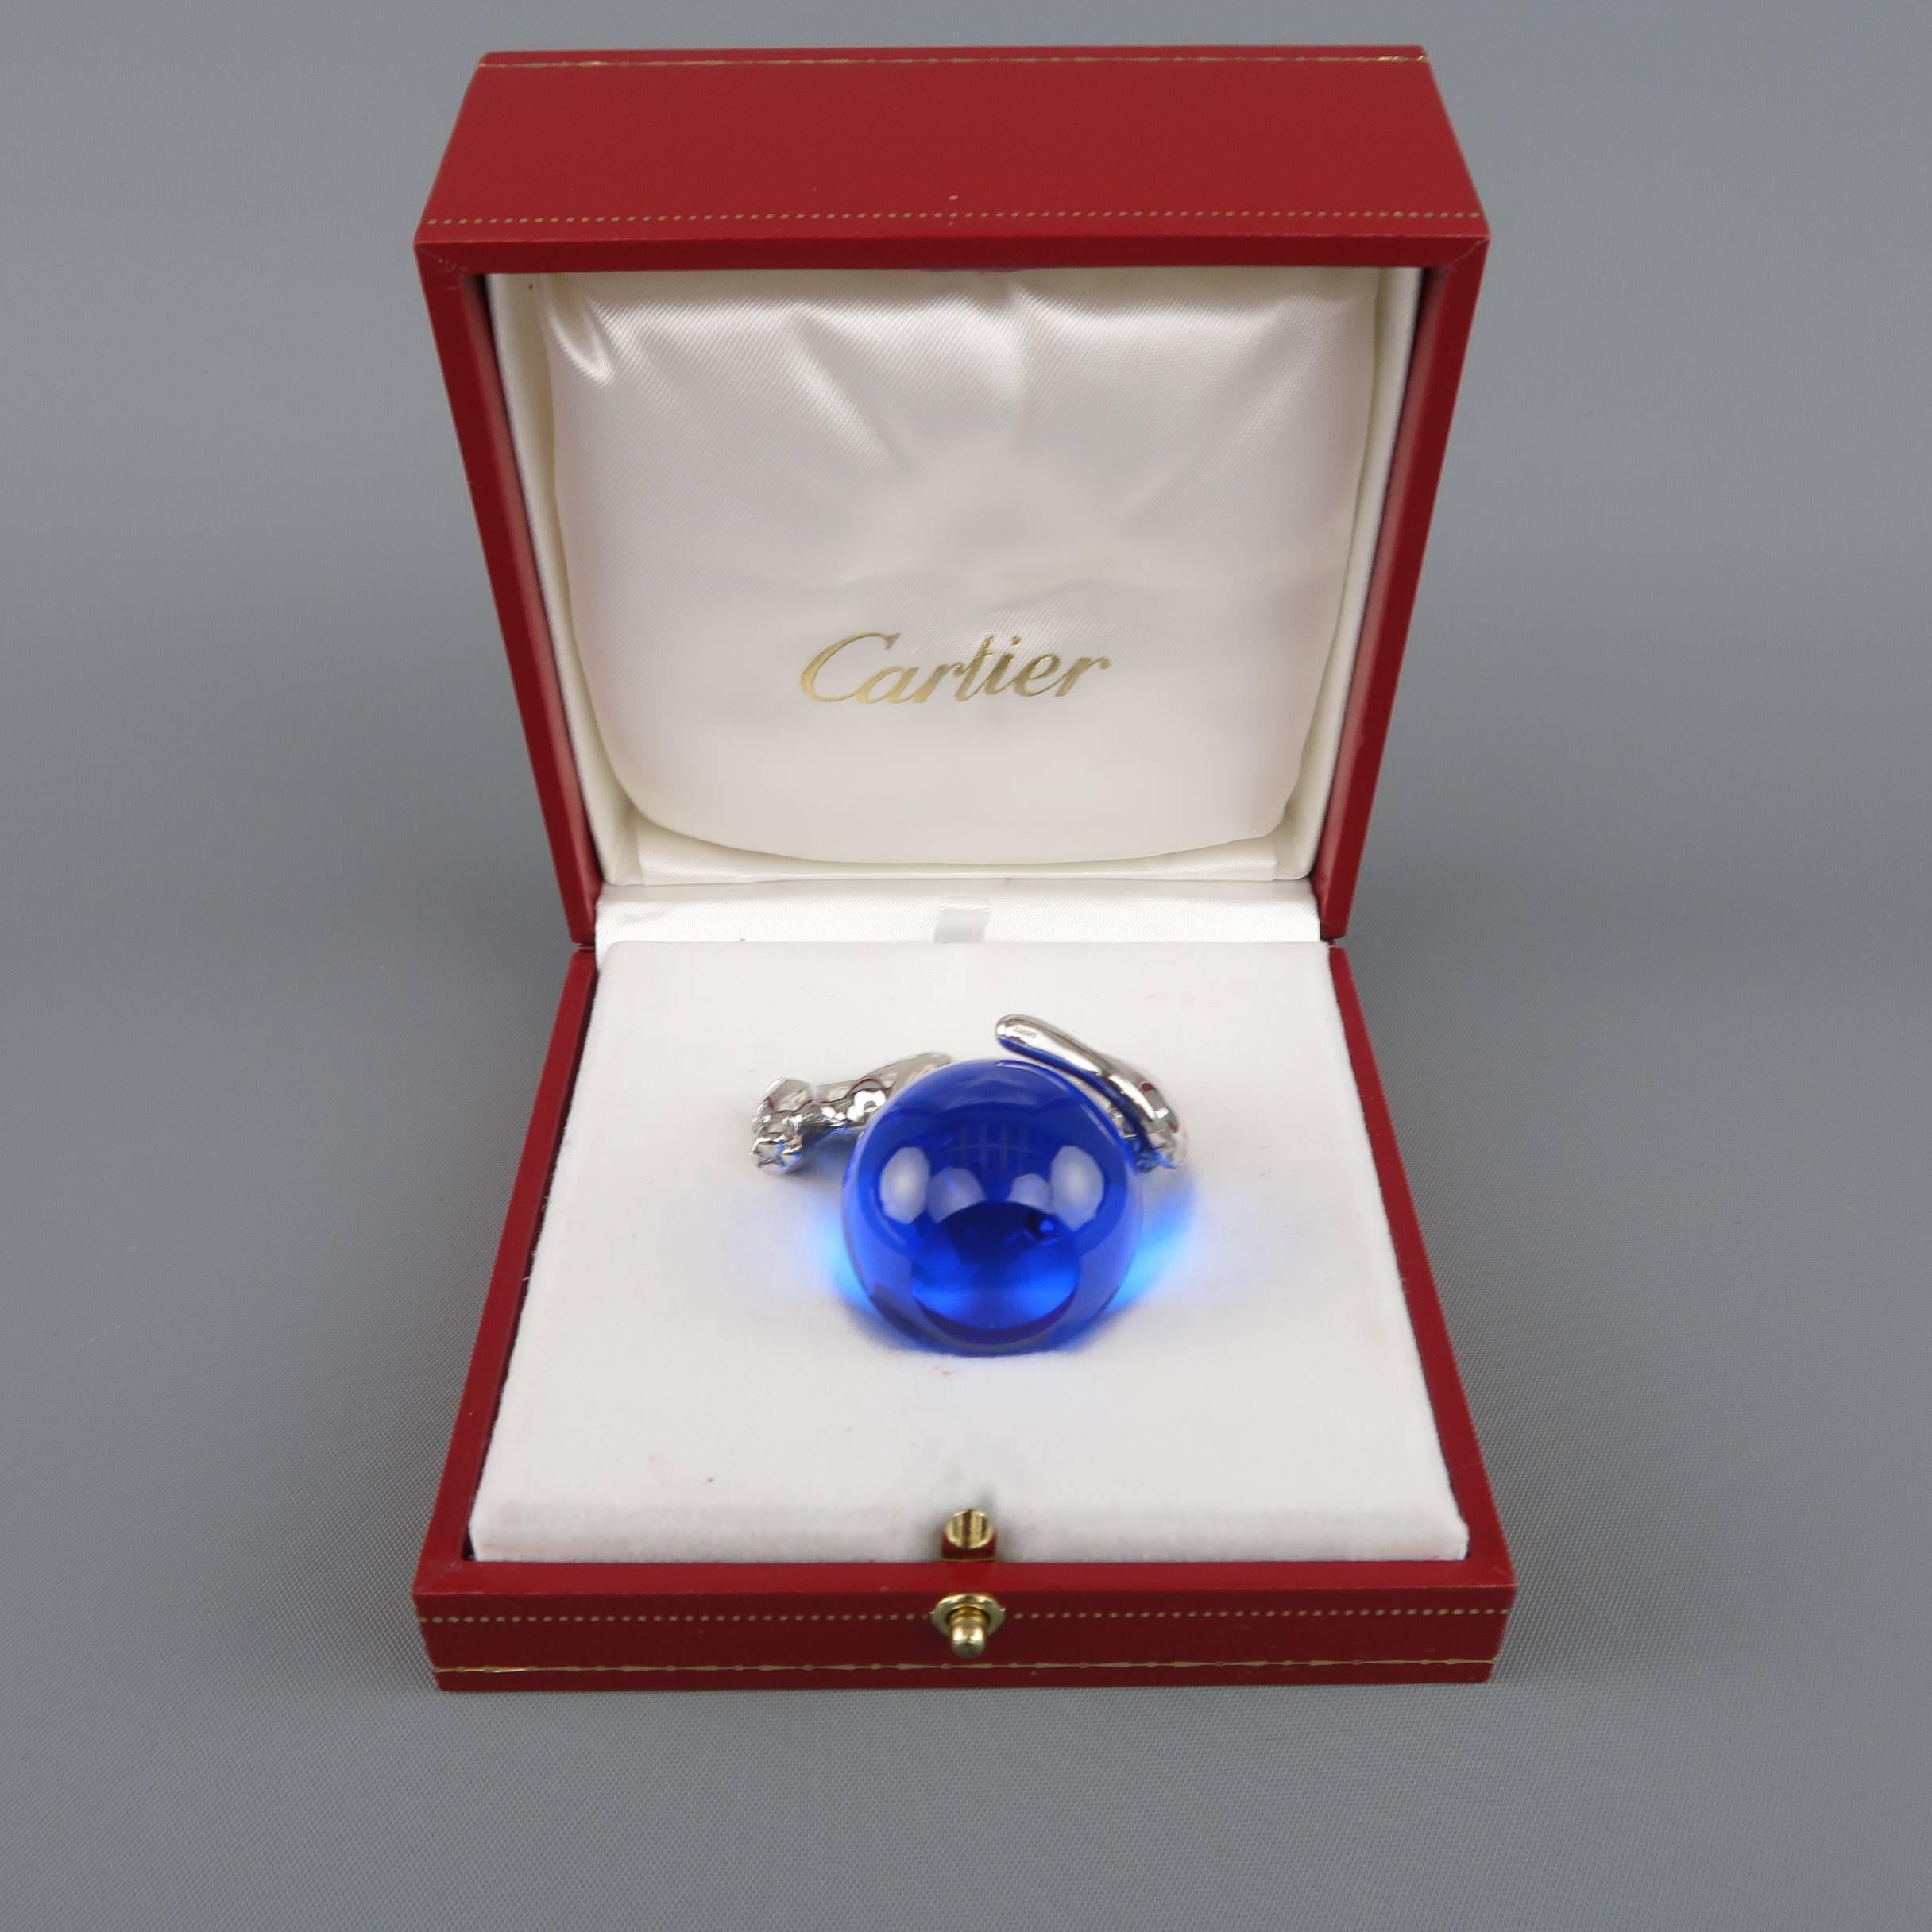 CARTIER Sterling Silver Panthere On Blue Crystal Ball Paperweight 2